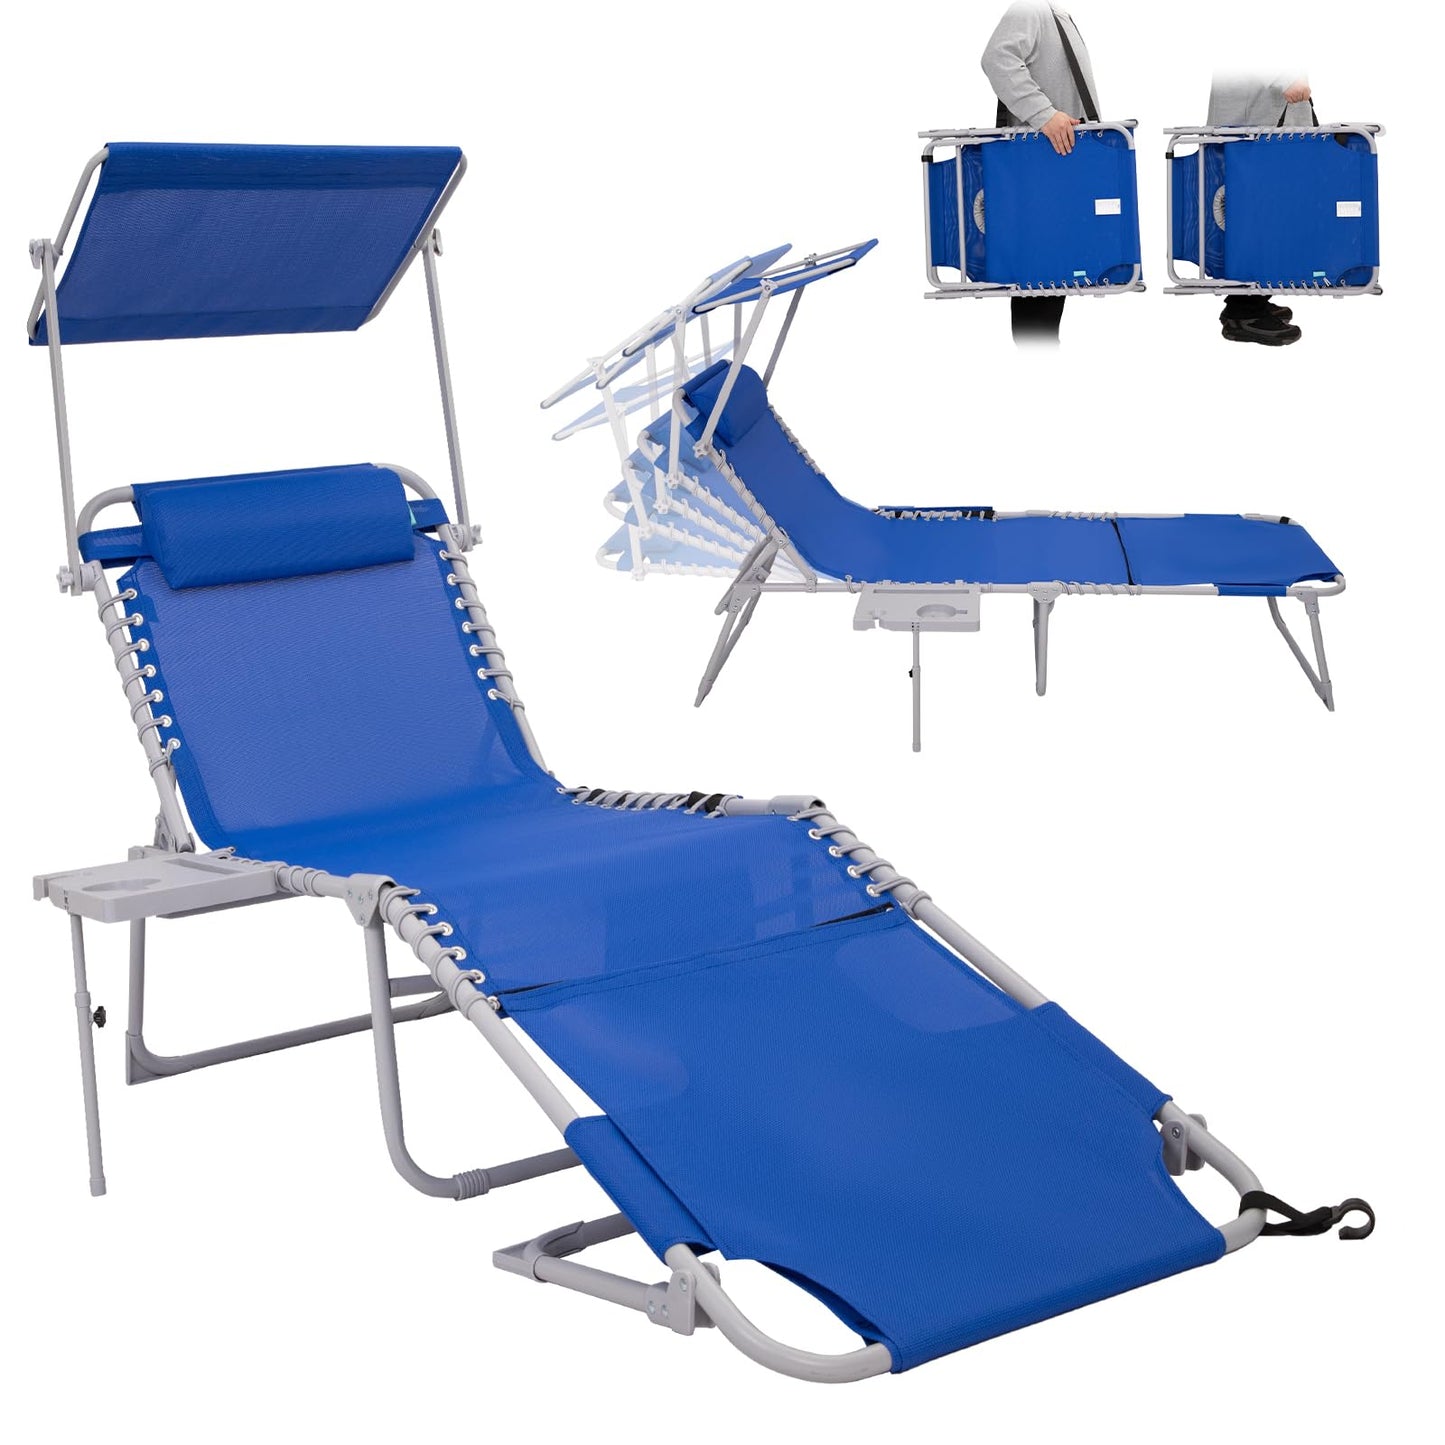 WEJOY Teslin Beach Lounge Chair Plus with Umbrella & Face Hole